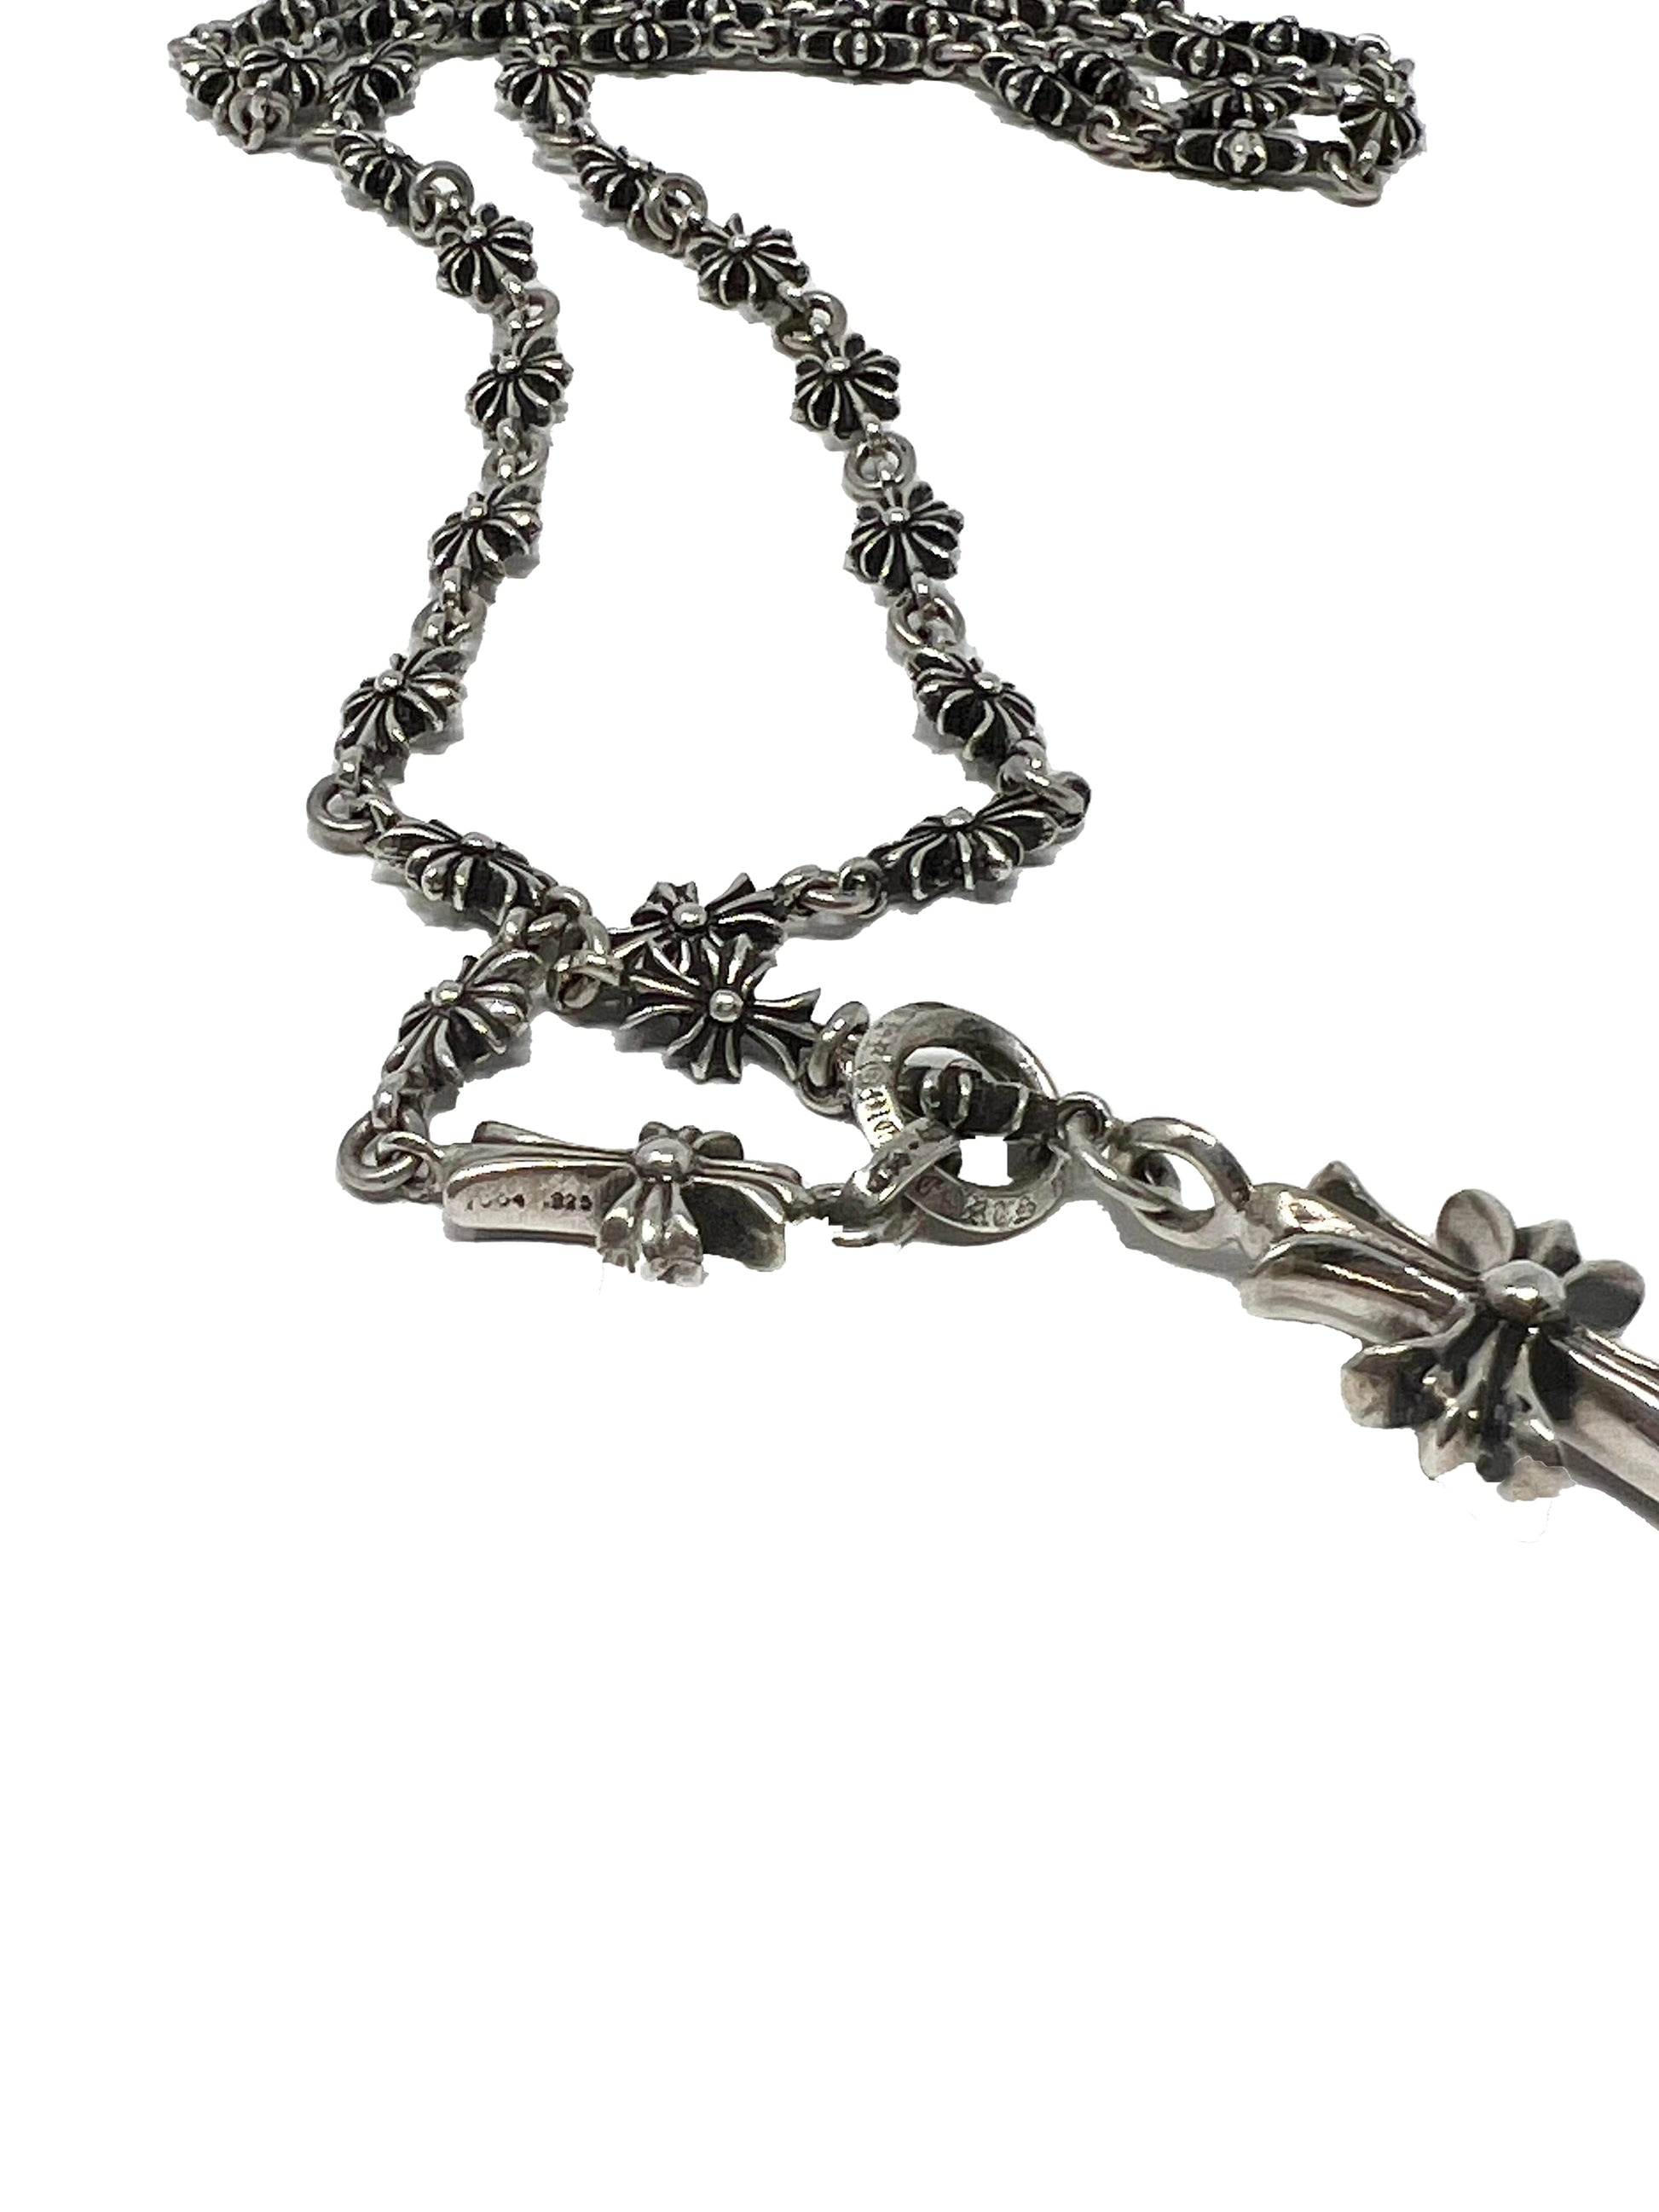 Can anyone legit check this chrome hearts rosary necklace please? I got it  for around 1400-1500$ on Grailed but it didn't come with any og packaging  or receipt. Thanks a lot 🙏 :